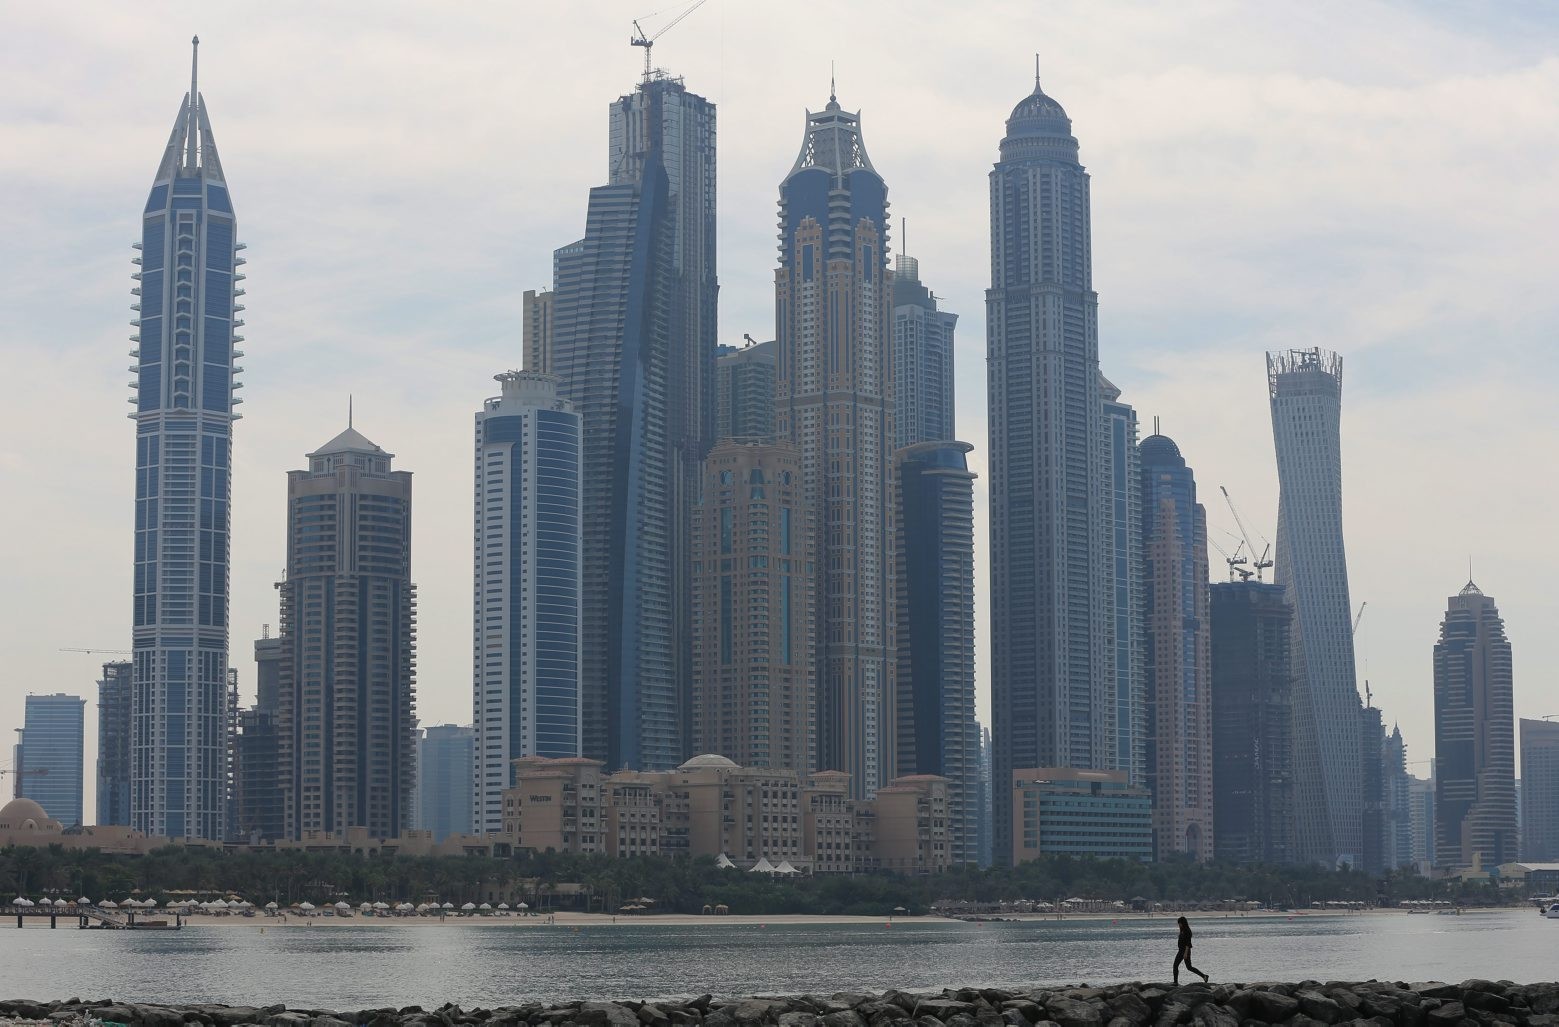 (Embargoed until after midnight GMT) A woman walks past luxury towers in the Marina district of Dubai, United Arab Emirates, Monday, Nov.17, 2014. The United Arab Emirates has quietly mounted ìan unprecedented clampdown on dissentî since 2011, with more than 100 political activists jailed or prosecuted for calling for political reforms, leading human rights group Amnesty International said in a report released Monday. The UAE, home to Abu Dhabi and Dubai, is ruled by families, like much of the energy-rich Gulf. There are no political parties and foreigners greatly outnumber locals. (AP Photo/Kamran Jebreili) Mideast Emirates Rights